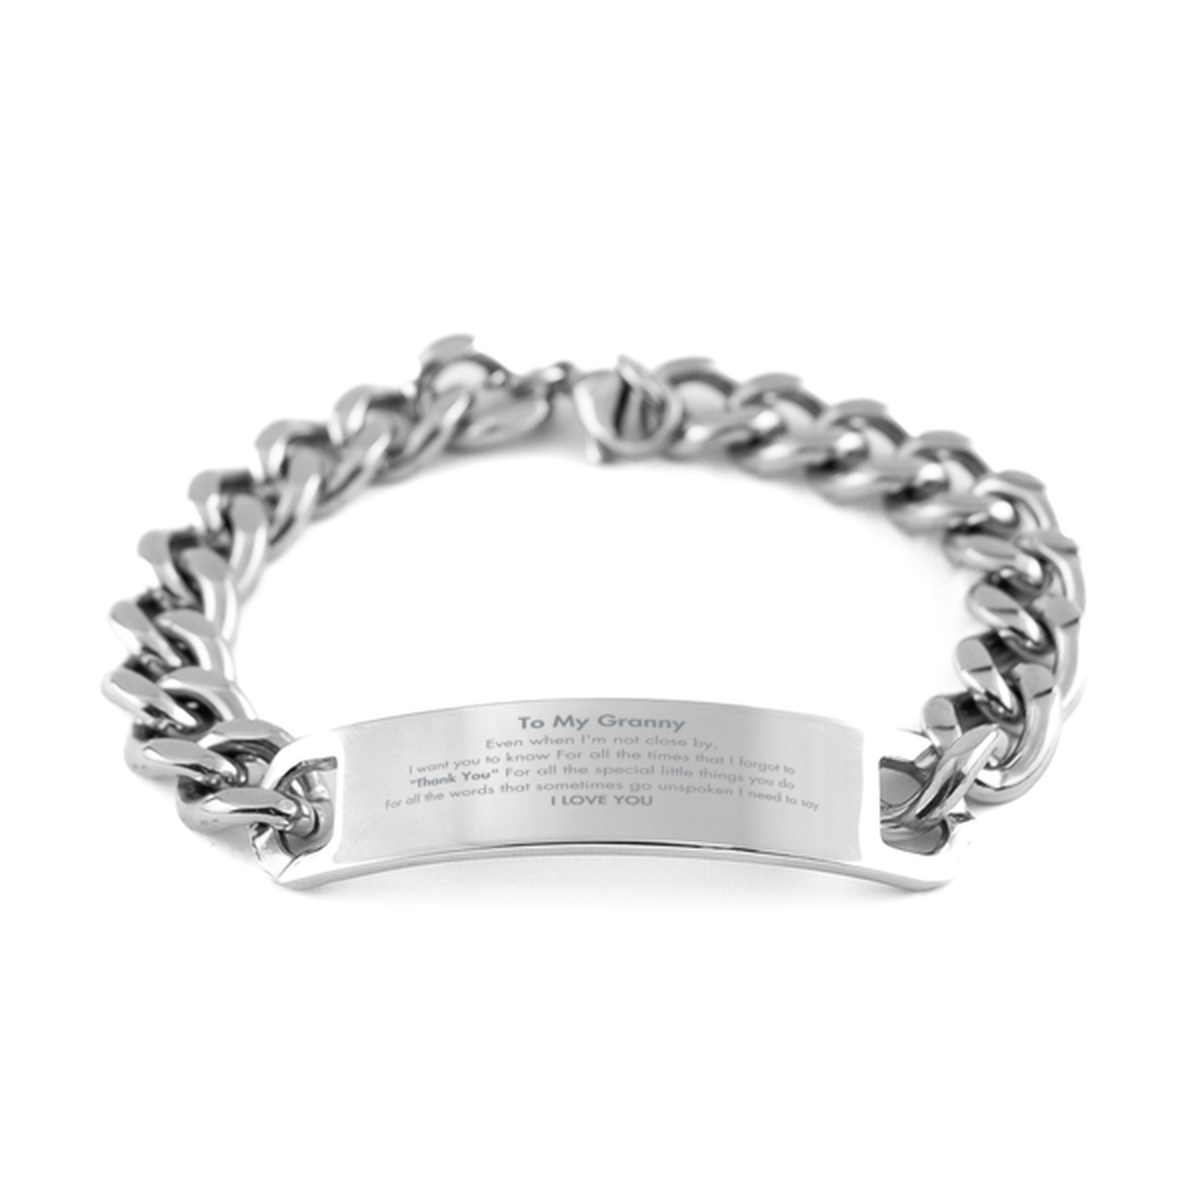 Thank You Gifts for Granny, Keepsake Cuban Chain Stainless Steel Bracelet Gifts for Granny Birthday Mother's day Father's Day Granny For all the words That sometimes go unspoken I need to say I LOVE YOU